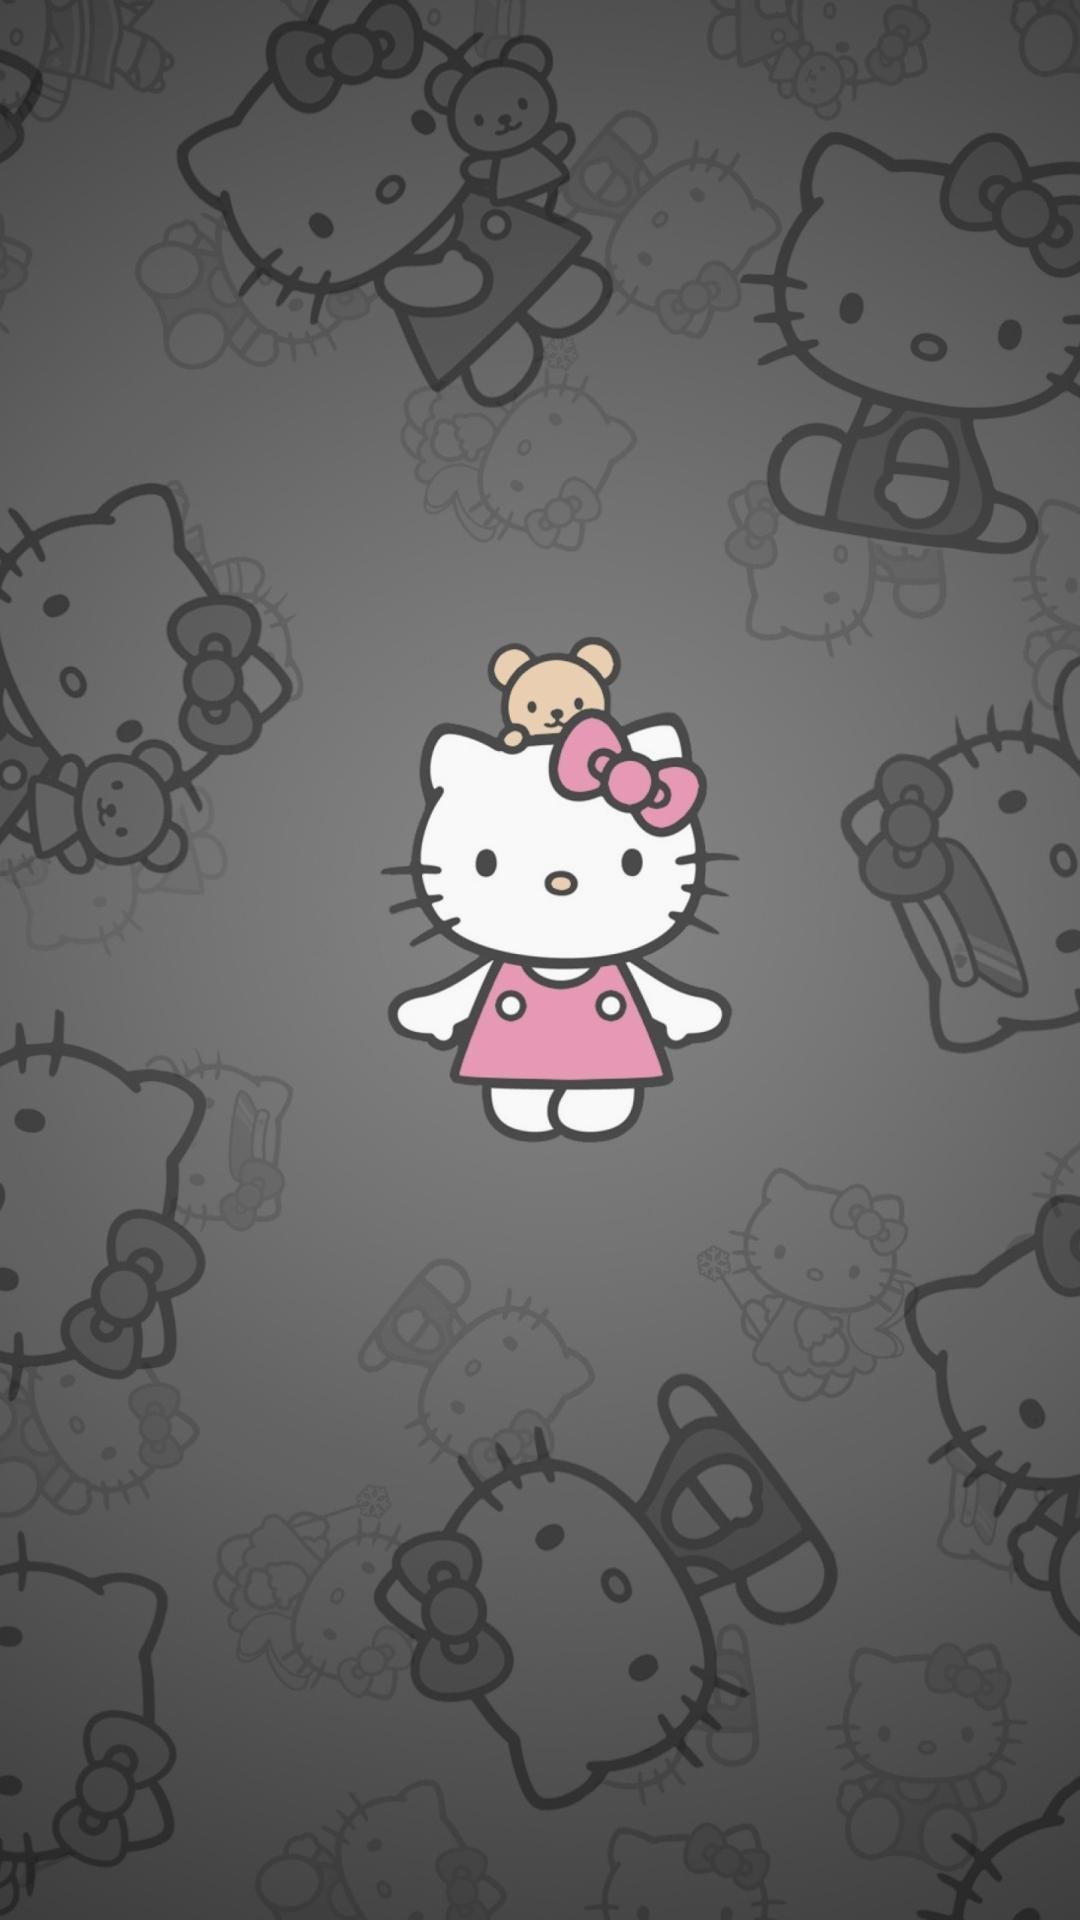 1080x1920 10. hello-kitty-wallpaper-for-android-HD10-338x600